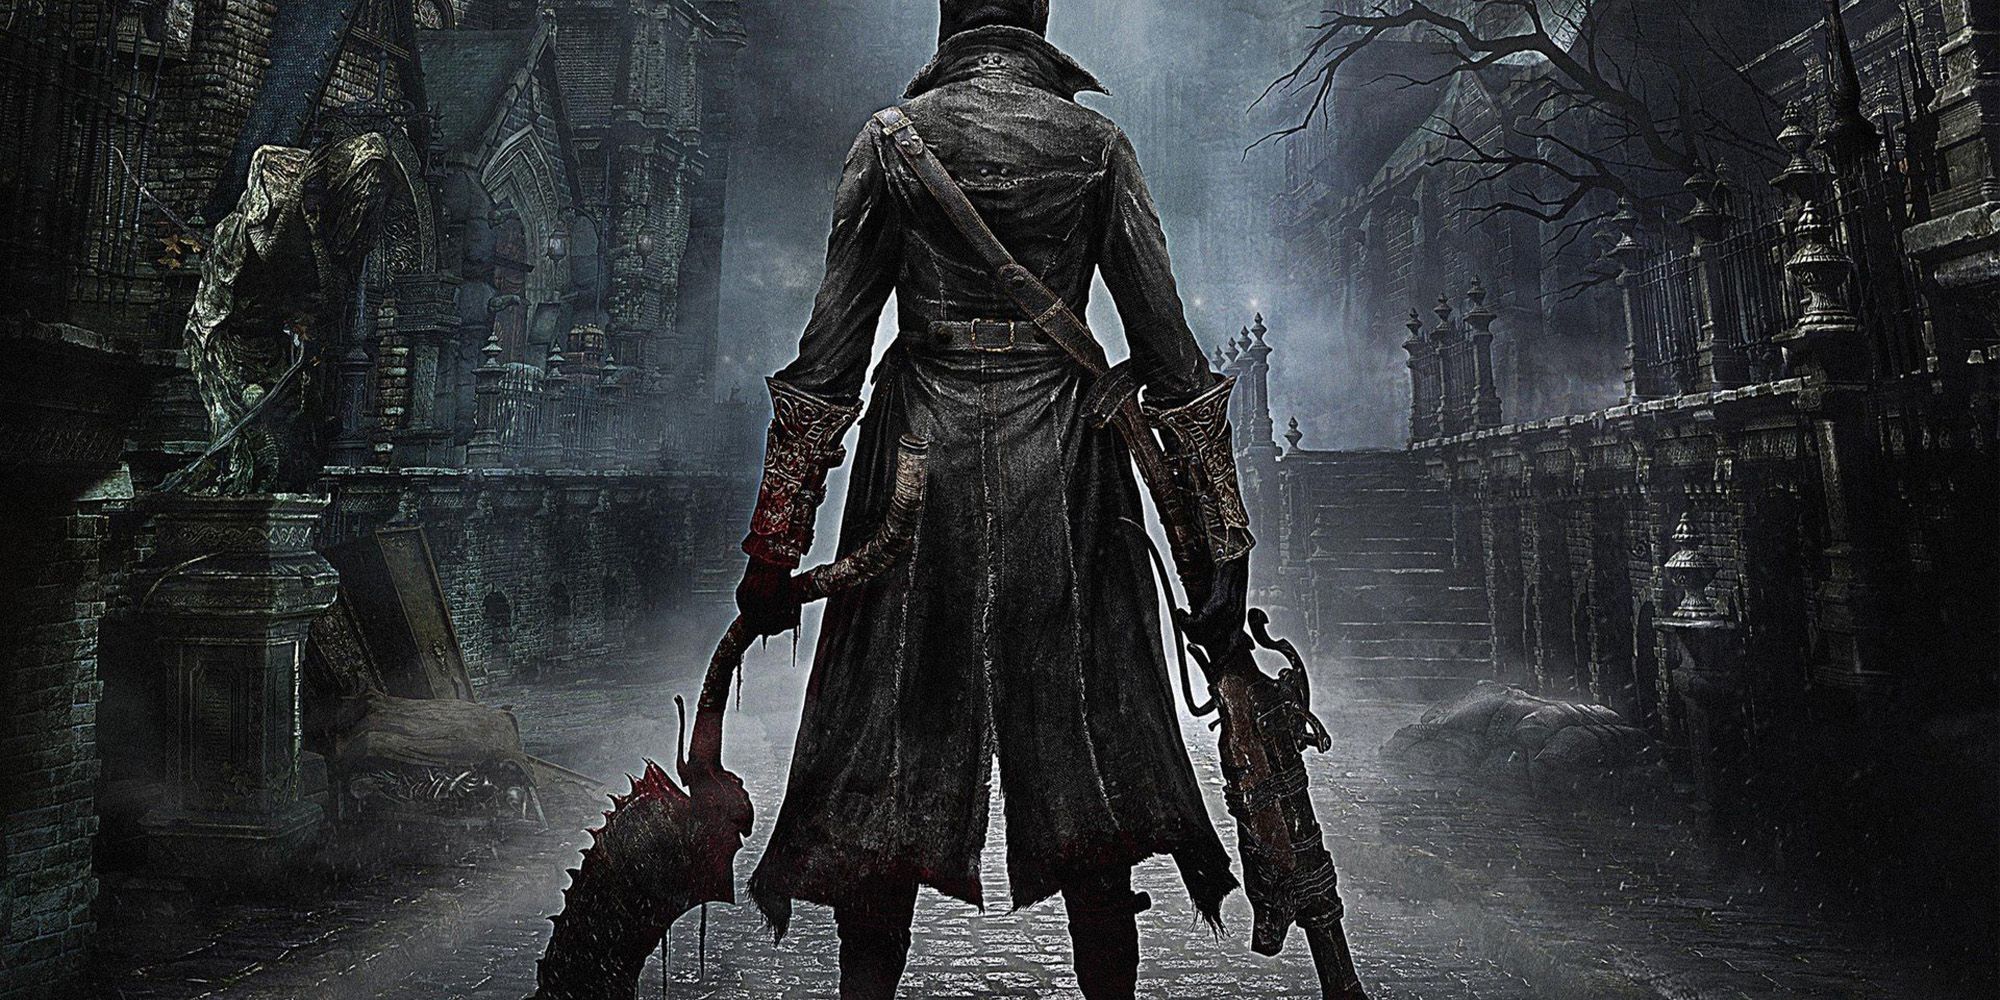 Box Art for the PlayStation 4 Title, Bloodborne. A Hunter wielding a sawblade and a blunderbuss